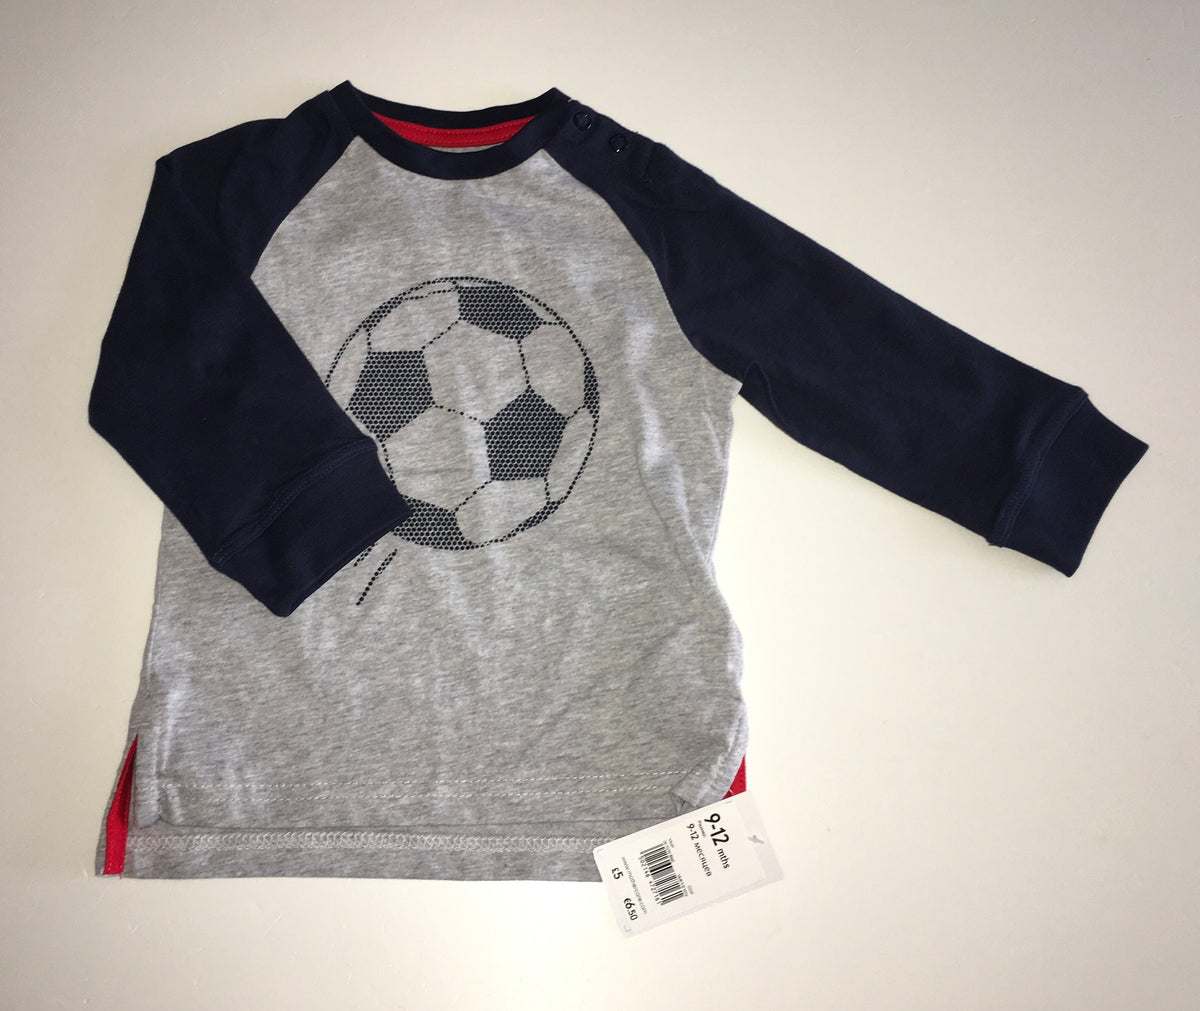 Mothercare Top, BNWT, Boys 9-12 Months